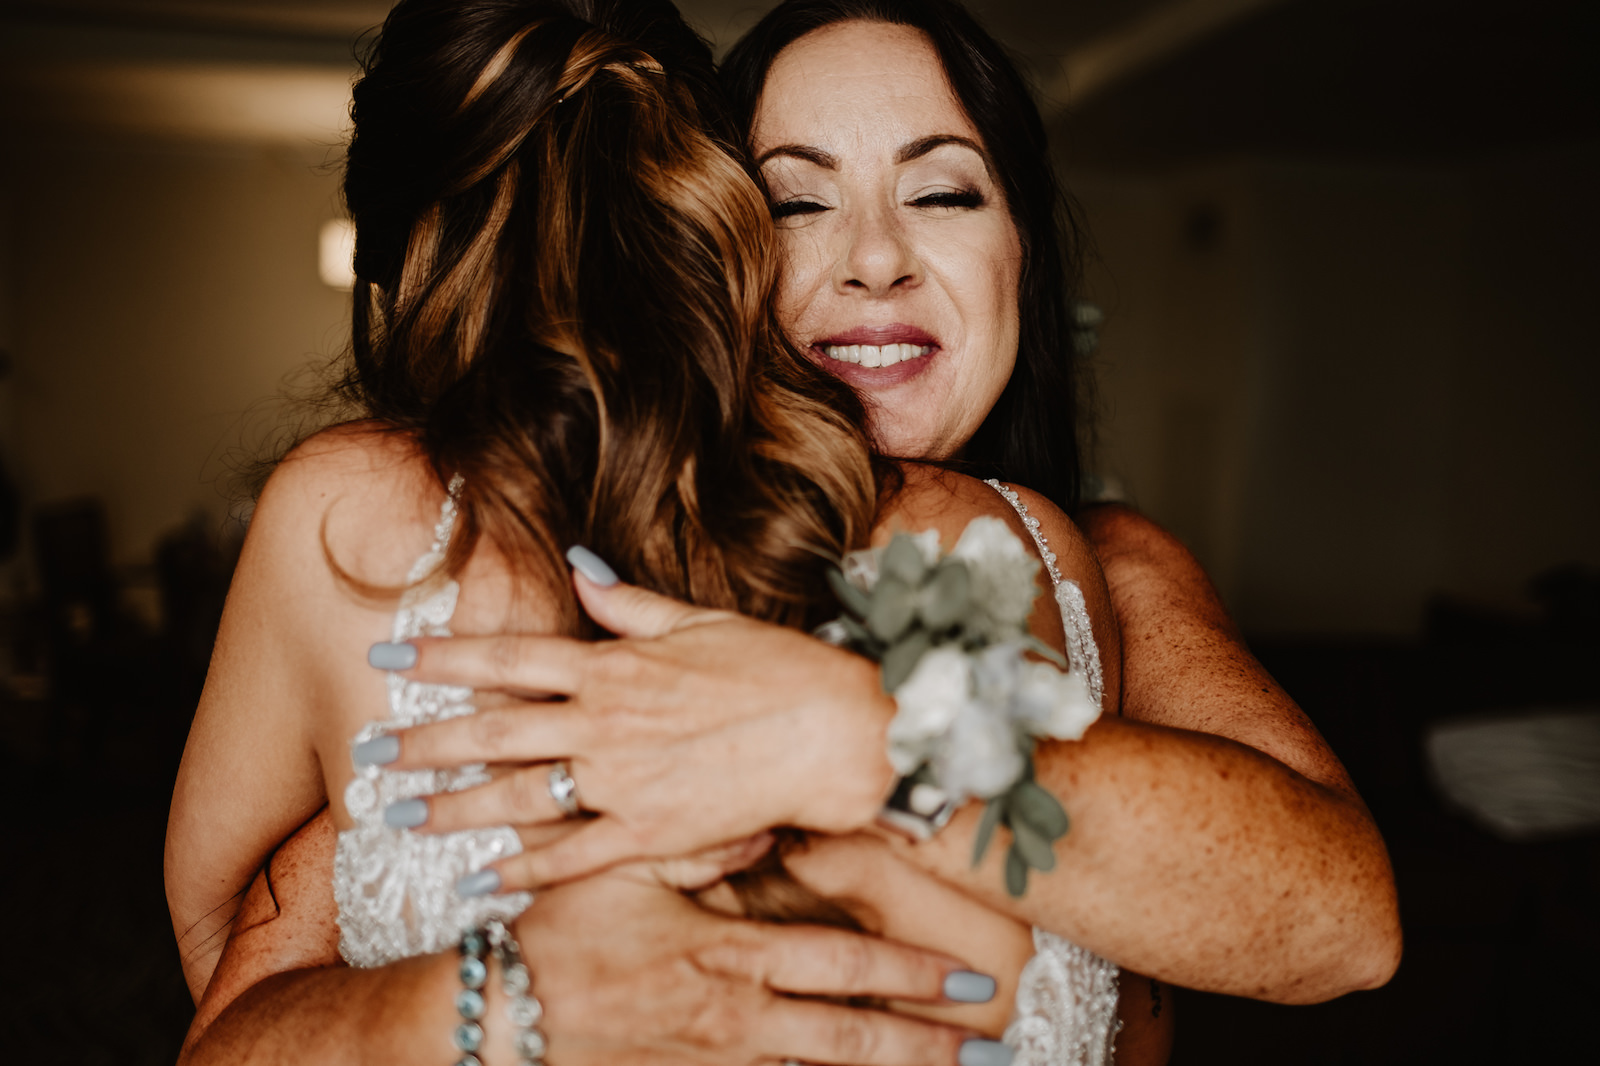 Bride Getting Ready | Mother of the Bride and Bride Embrace Hug